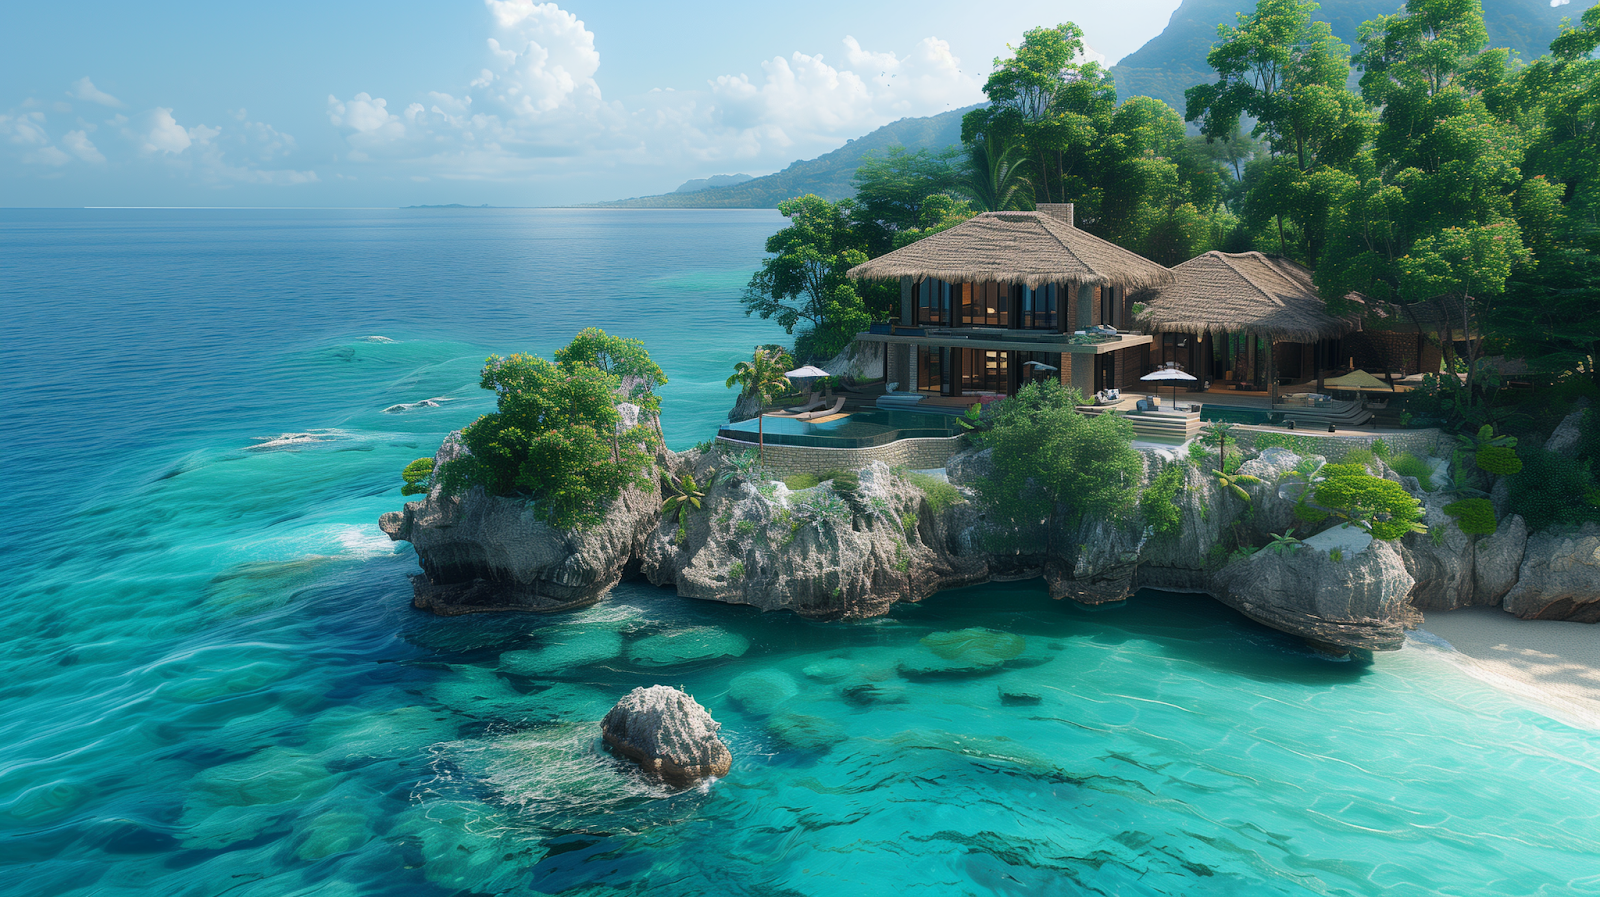 An exclusive villa with views of crystal clear waters